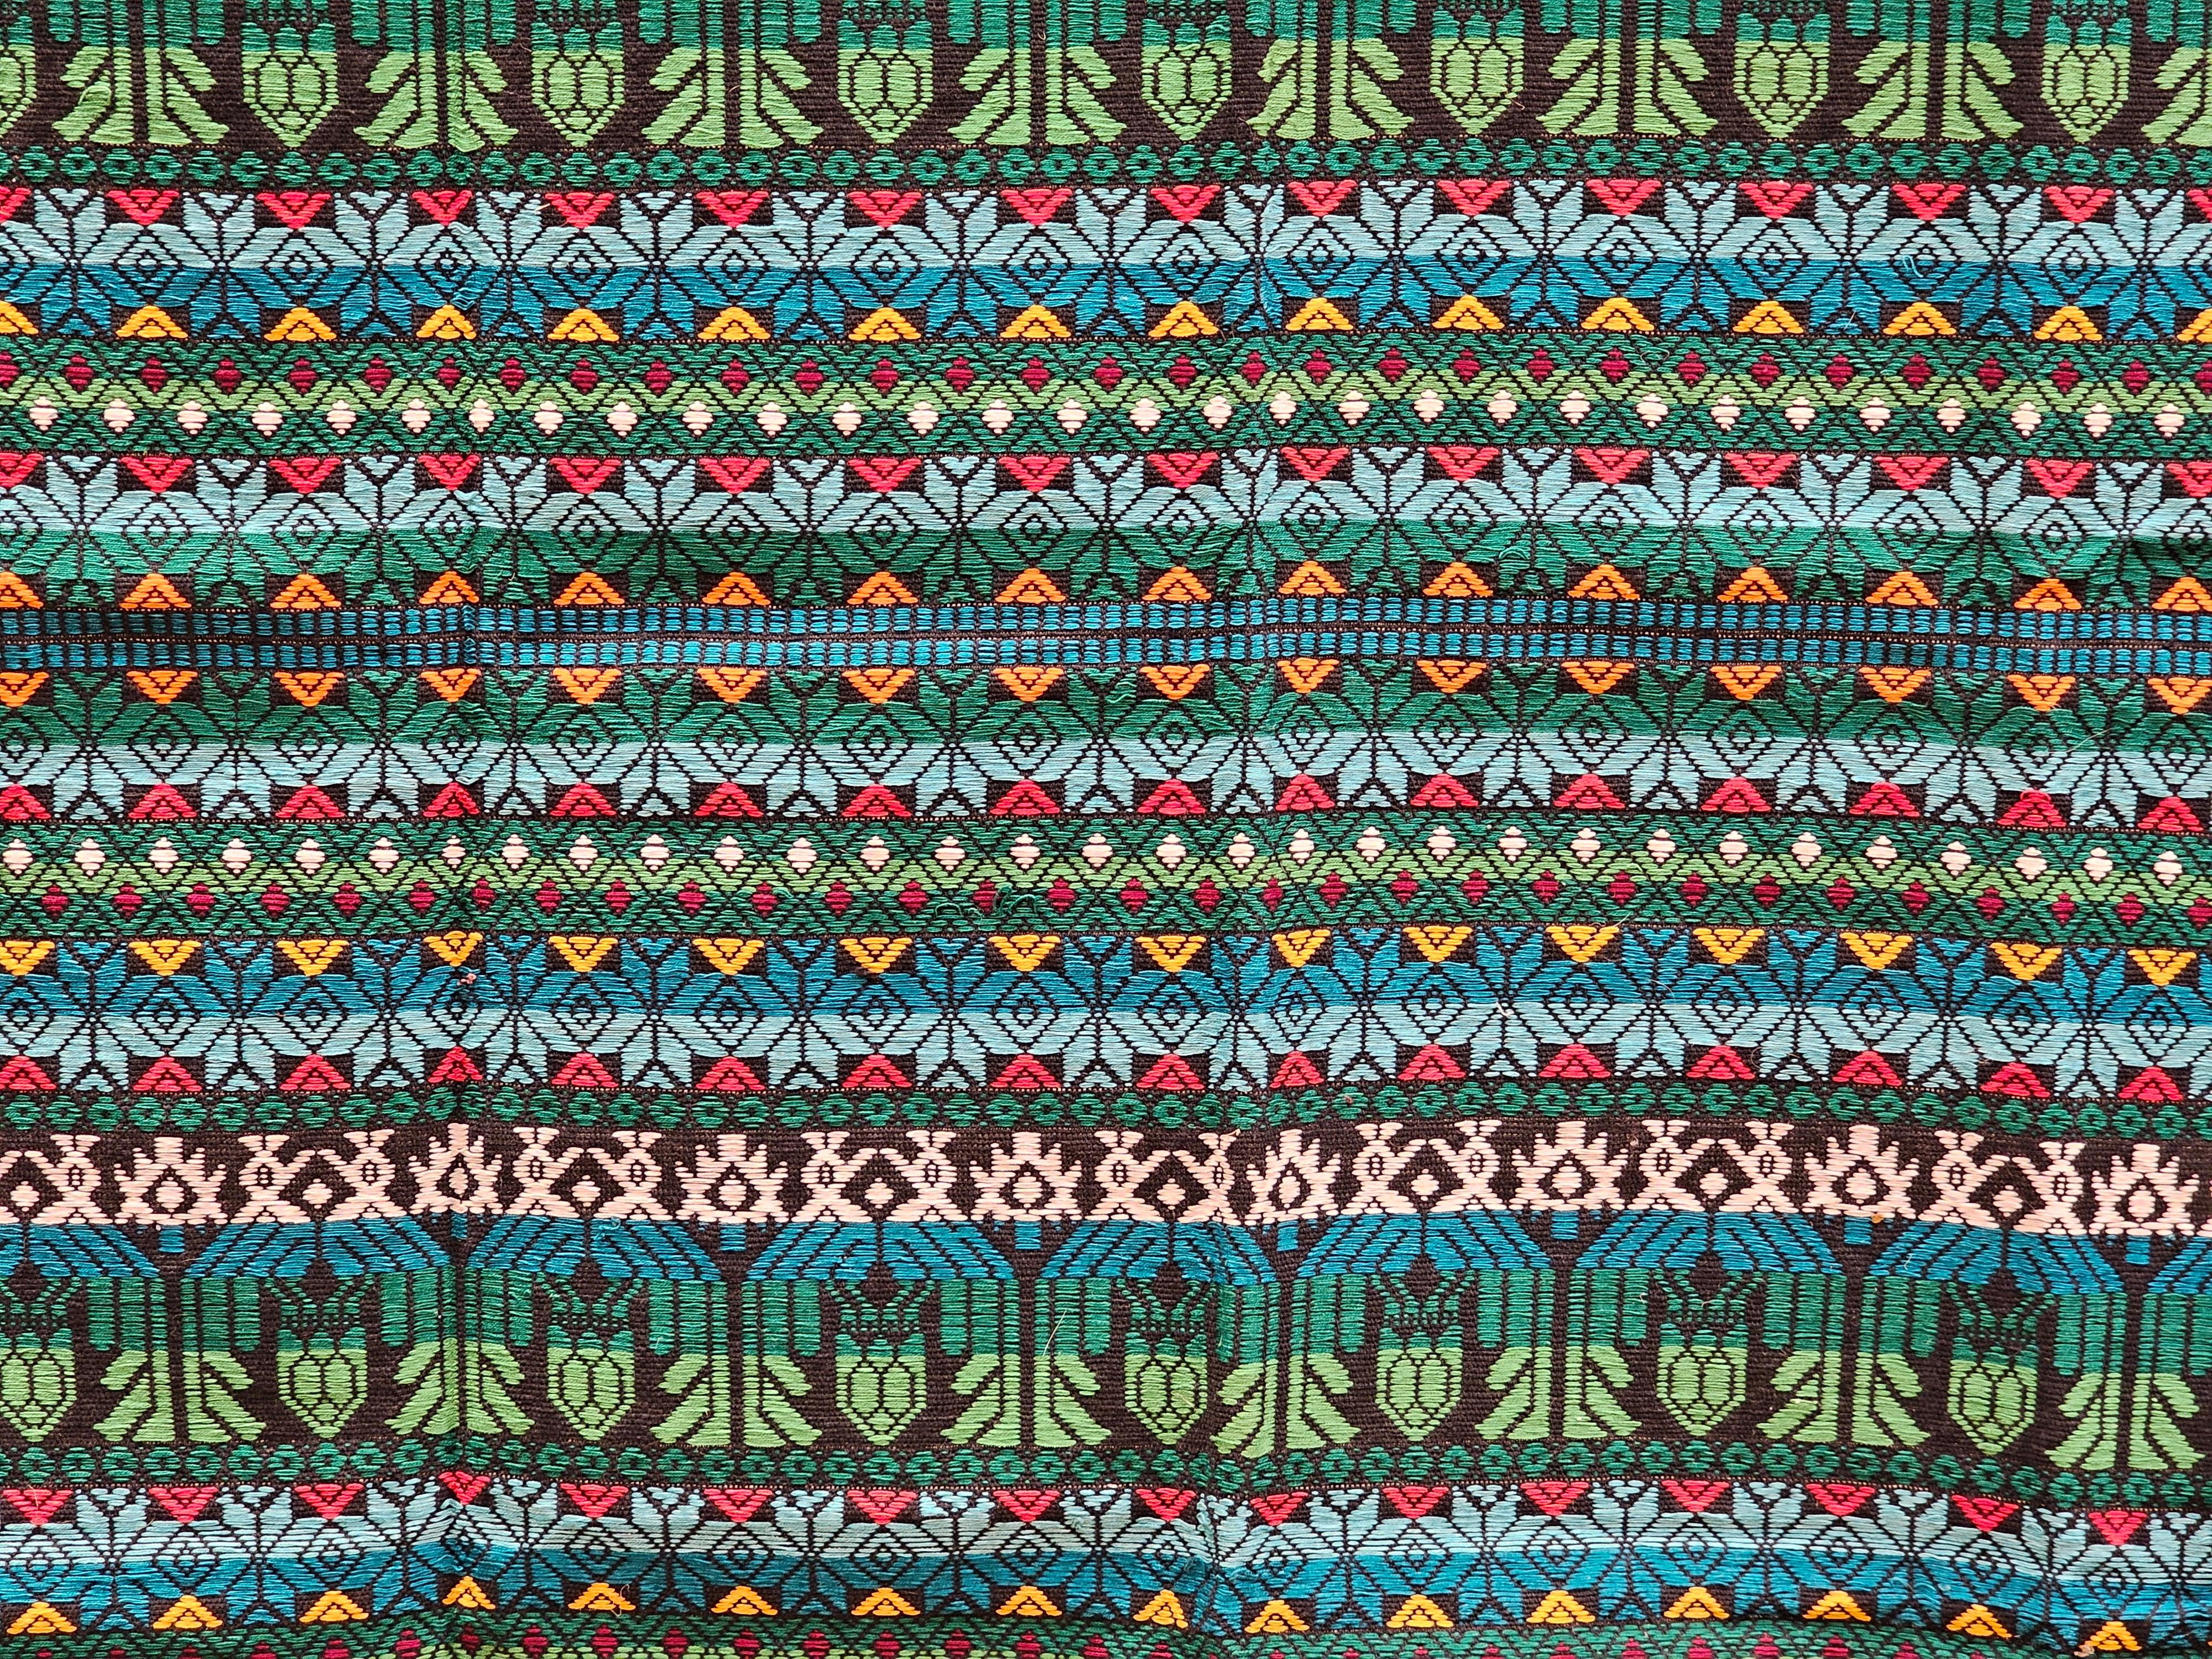 Hand-Crafted Vintage South American Hand-woven Textile Panel in Green, Blue, Red, Black For Sale